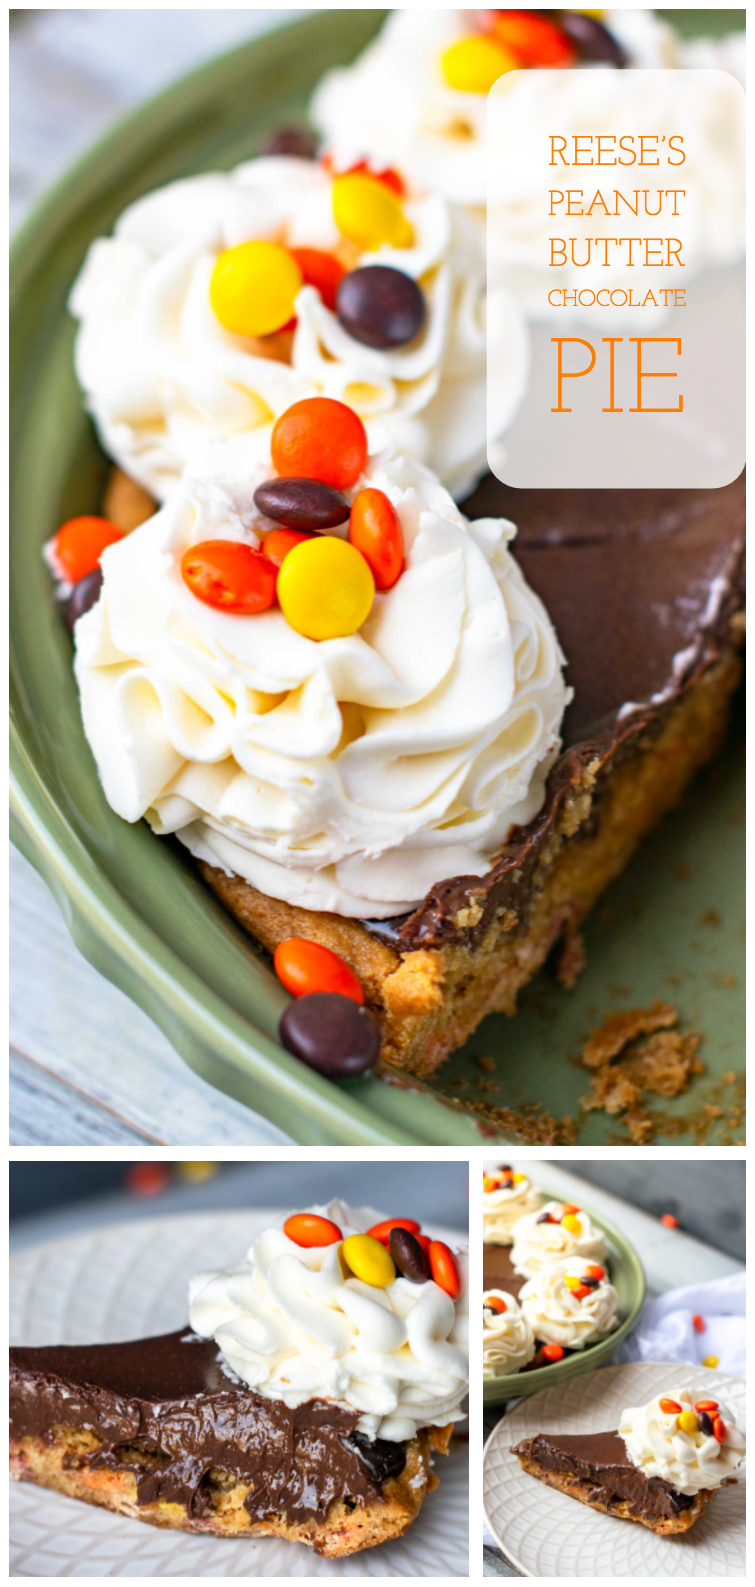 Reese's Peanut Butter Chocolate Pie